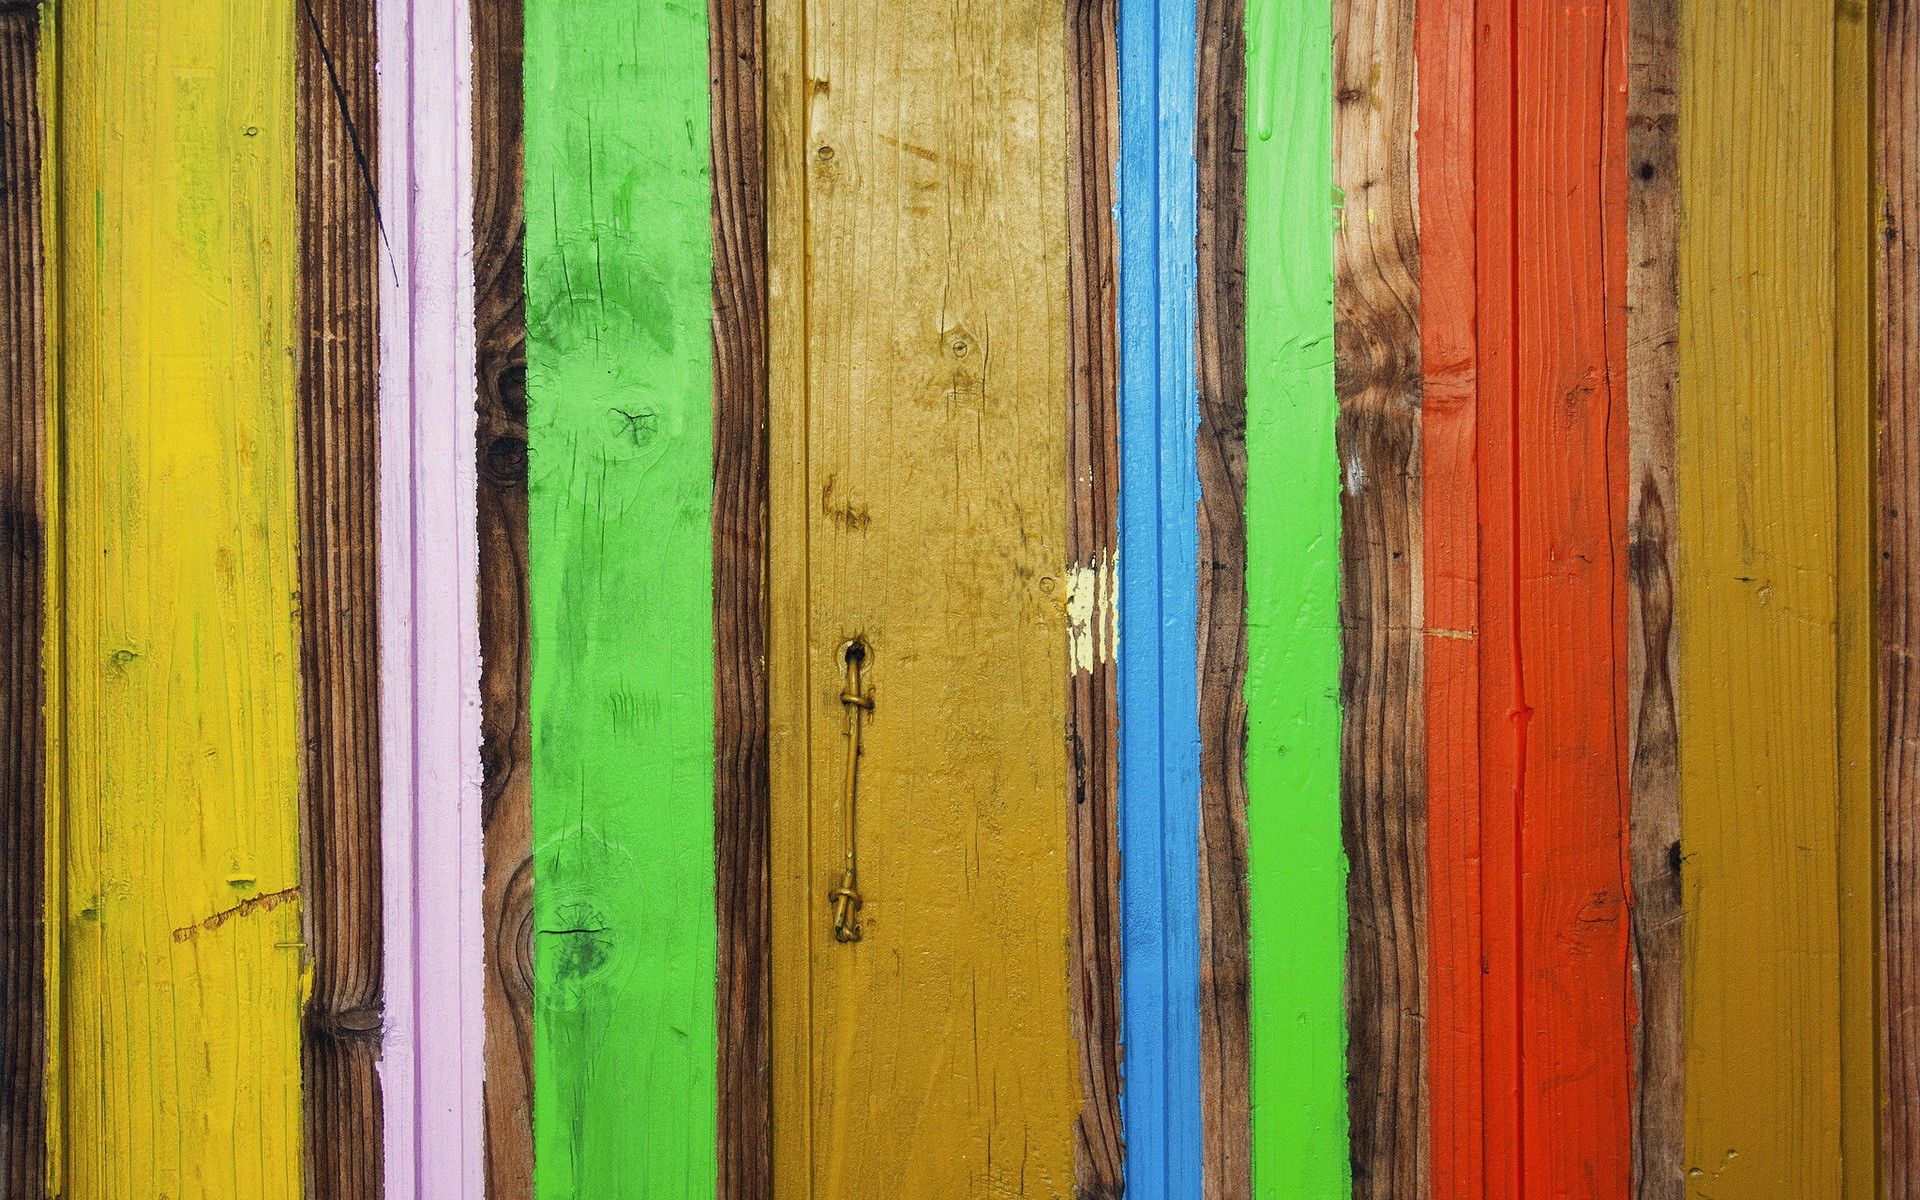 multicolored, wood, wooden, motley, texture, textures, planks, board